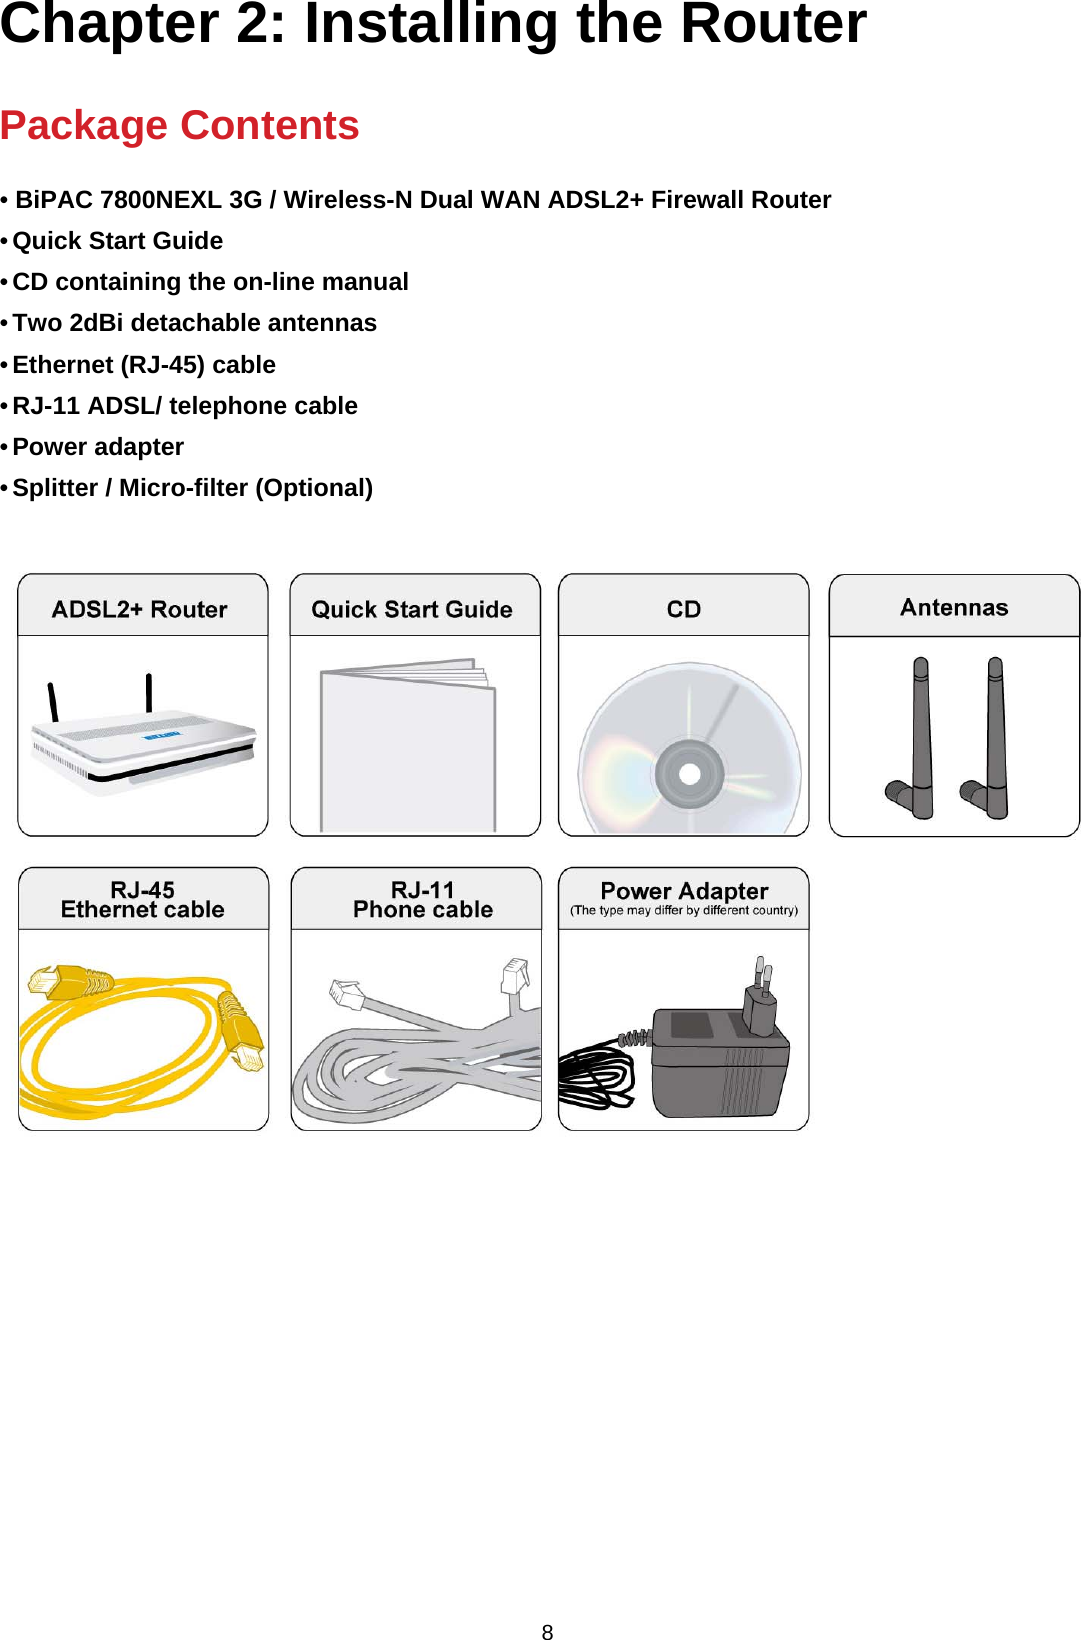  8 Chapter 2: Installing the Router   Package Contents  • BiPAC 7800NEXL 3G / Wireless-N Dual WAN ADSL2+ Firewall Router • Quick Start Guide • CD containing the on-line manual • Two 2dBi detachable antennas  • Ethernet (RJ-45) cable • RJ-11 ADSL/ telephone cable • Power adapter • Splitter / Micro-filter (Optional)                     